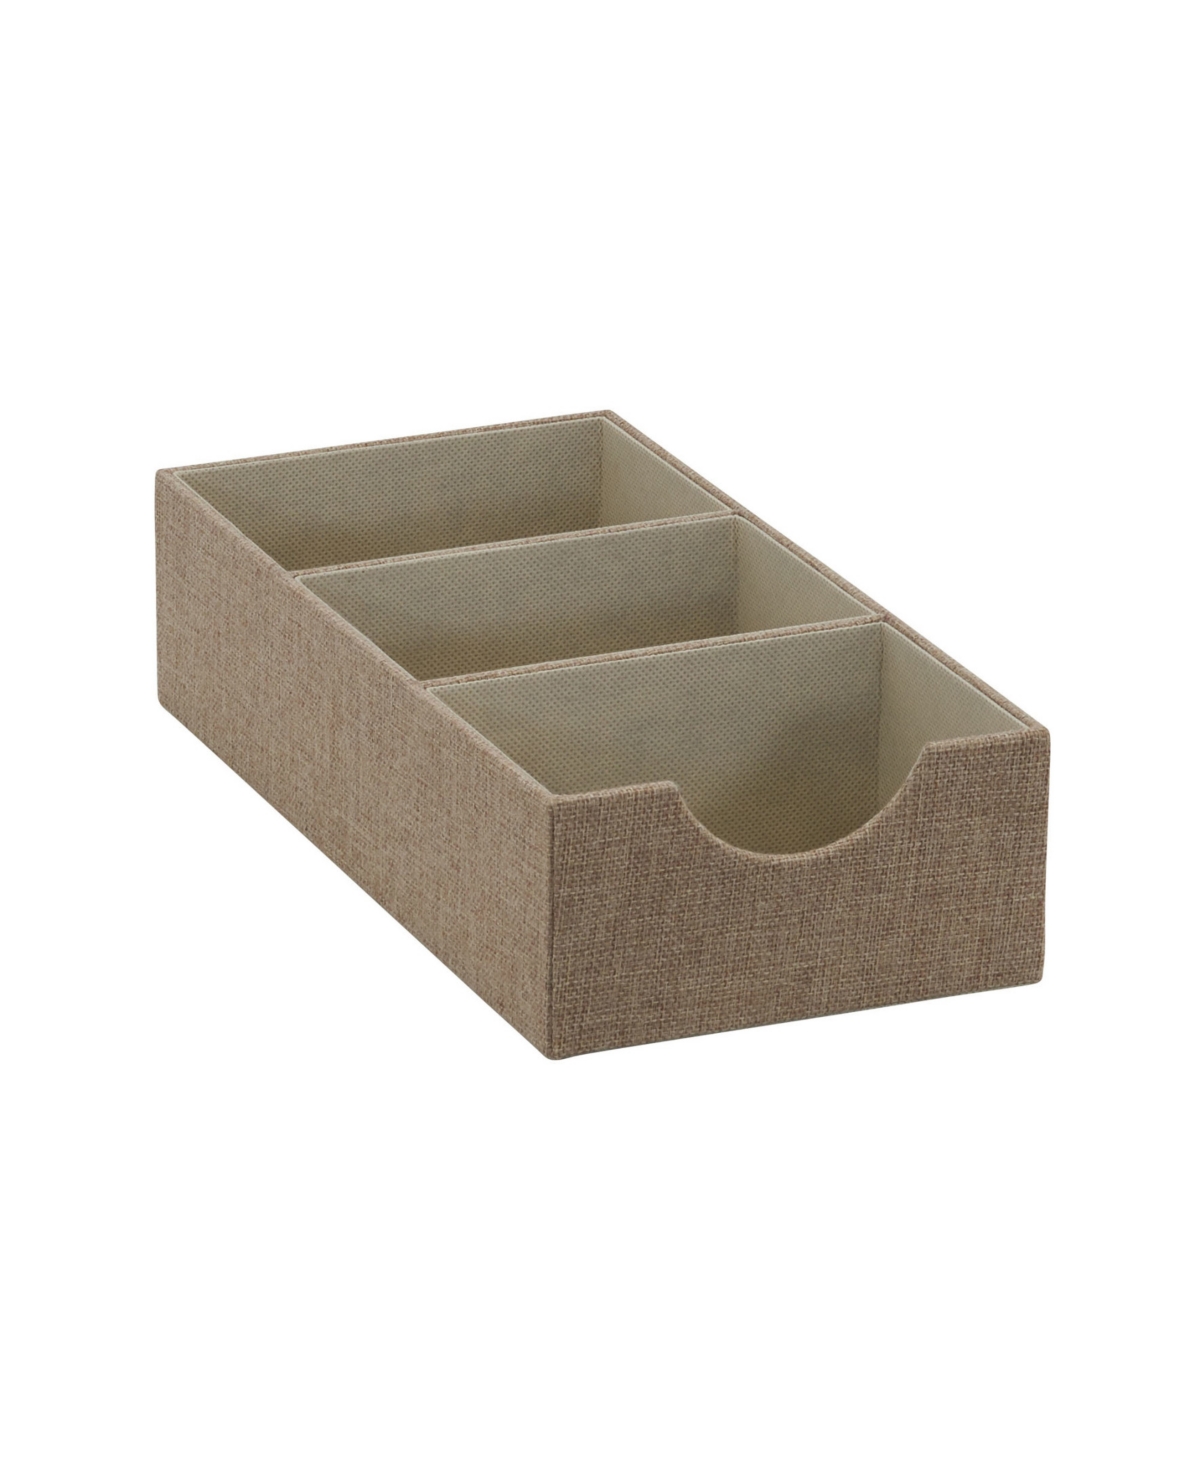 Organizer Tray Accessory Organizer Sturdy Drawer Organizer with Fabric Covering and Three Compartments - Gray